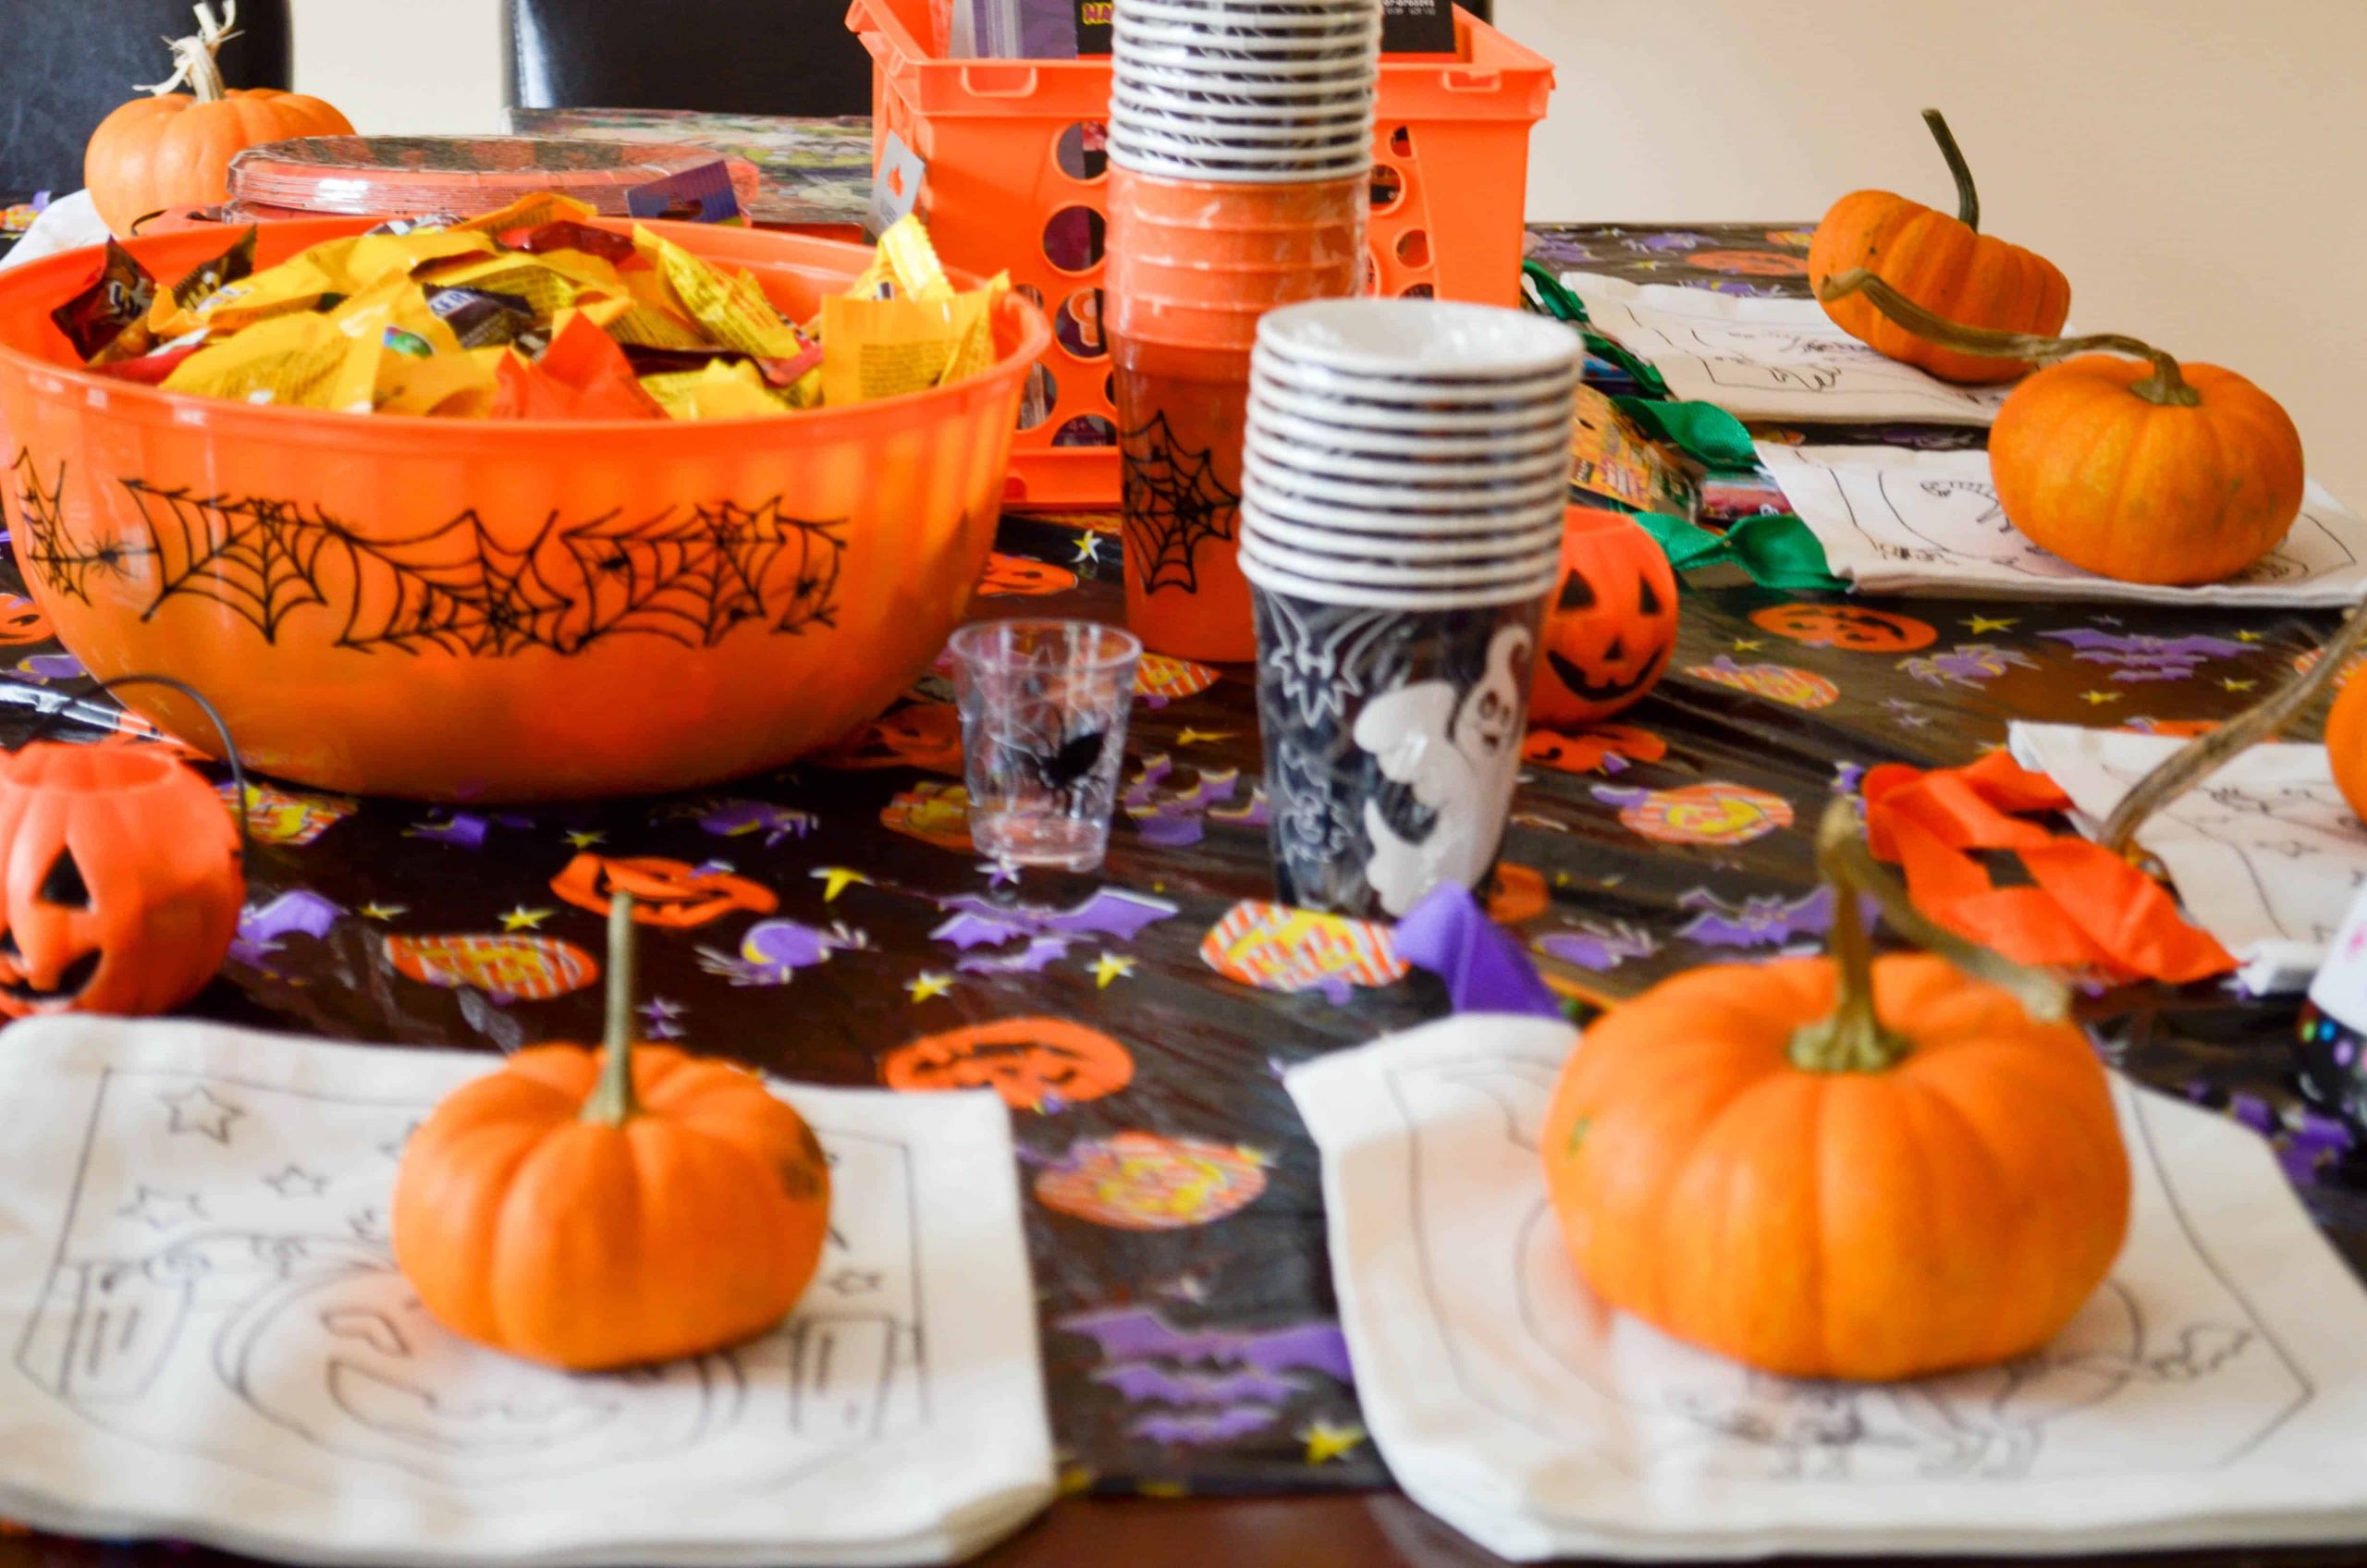 Best Halloween Party Ideas
 How To Throw The Best EVER Halloween Themed Birthday Party